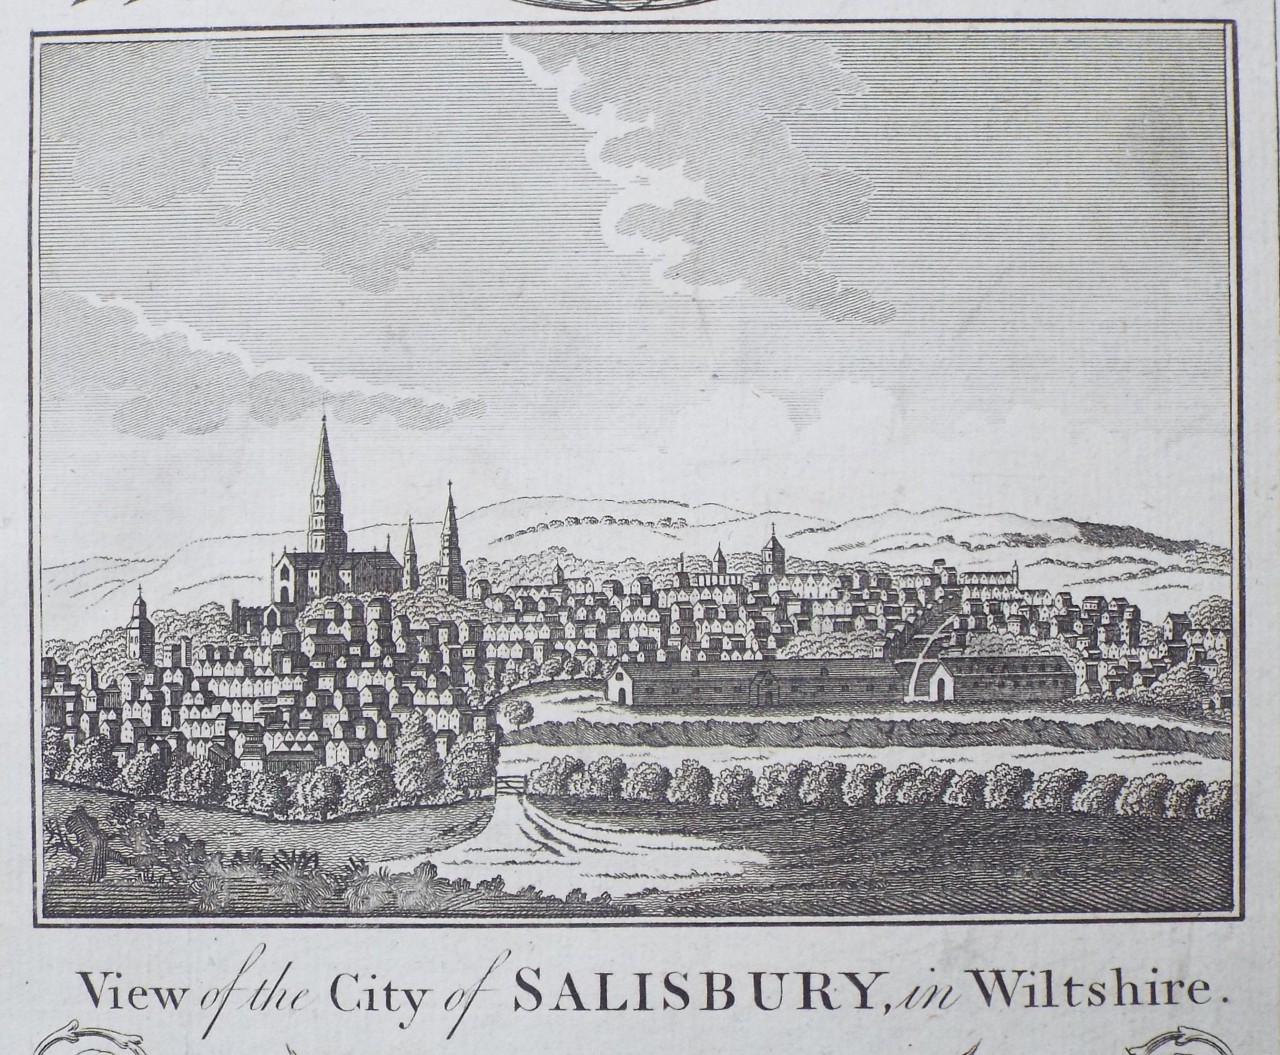 Print - View of the City of Salisbury, in Wiltshire.